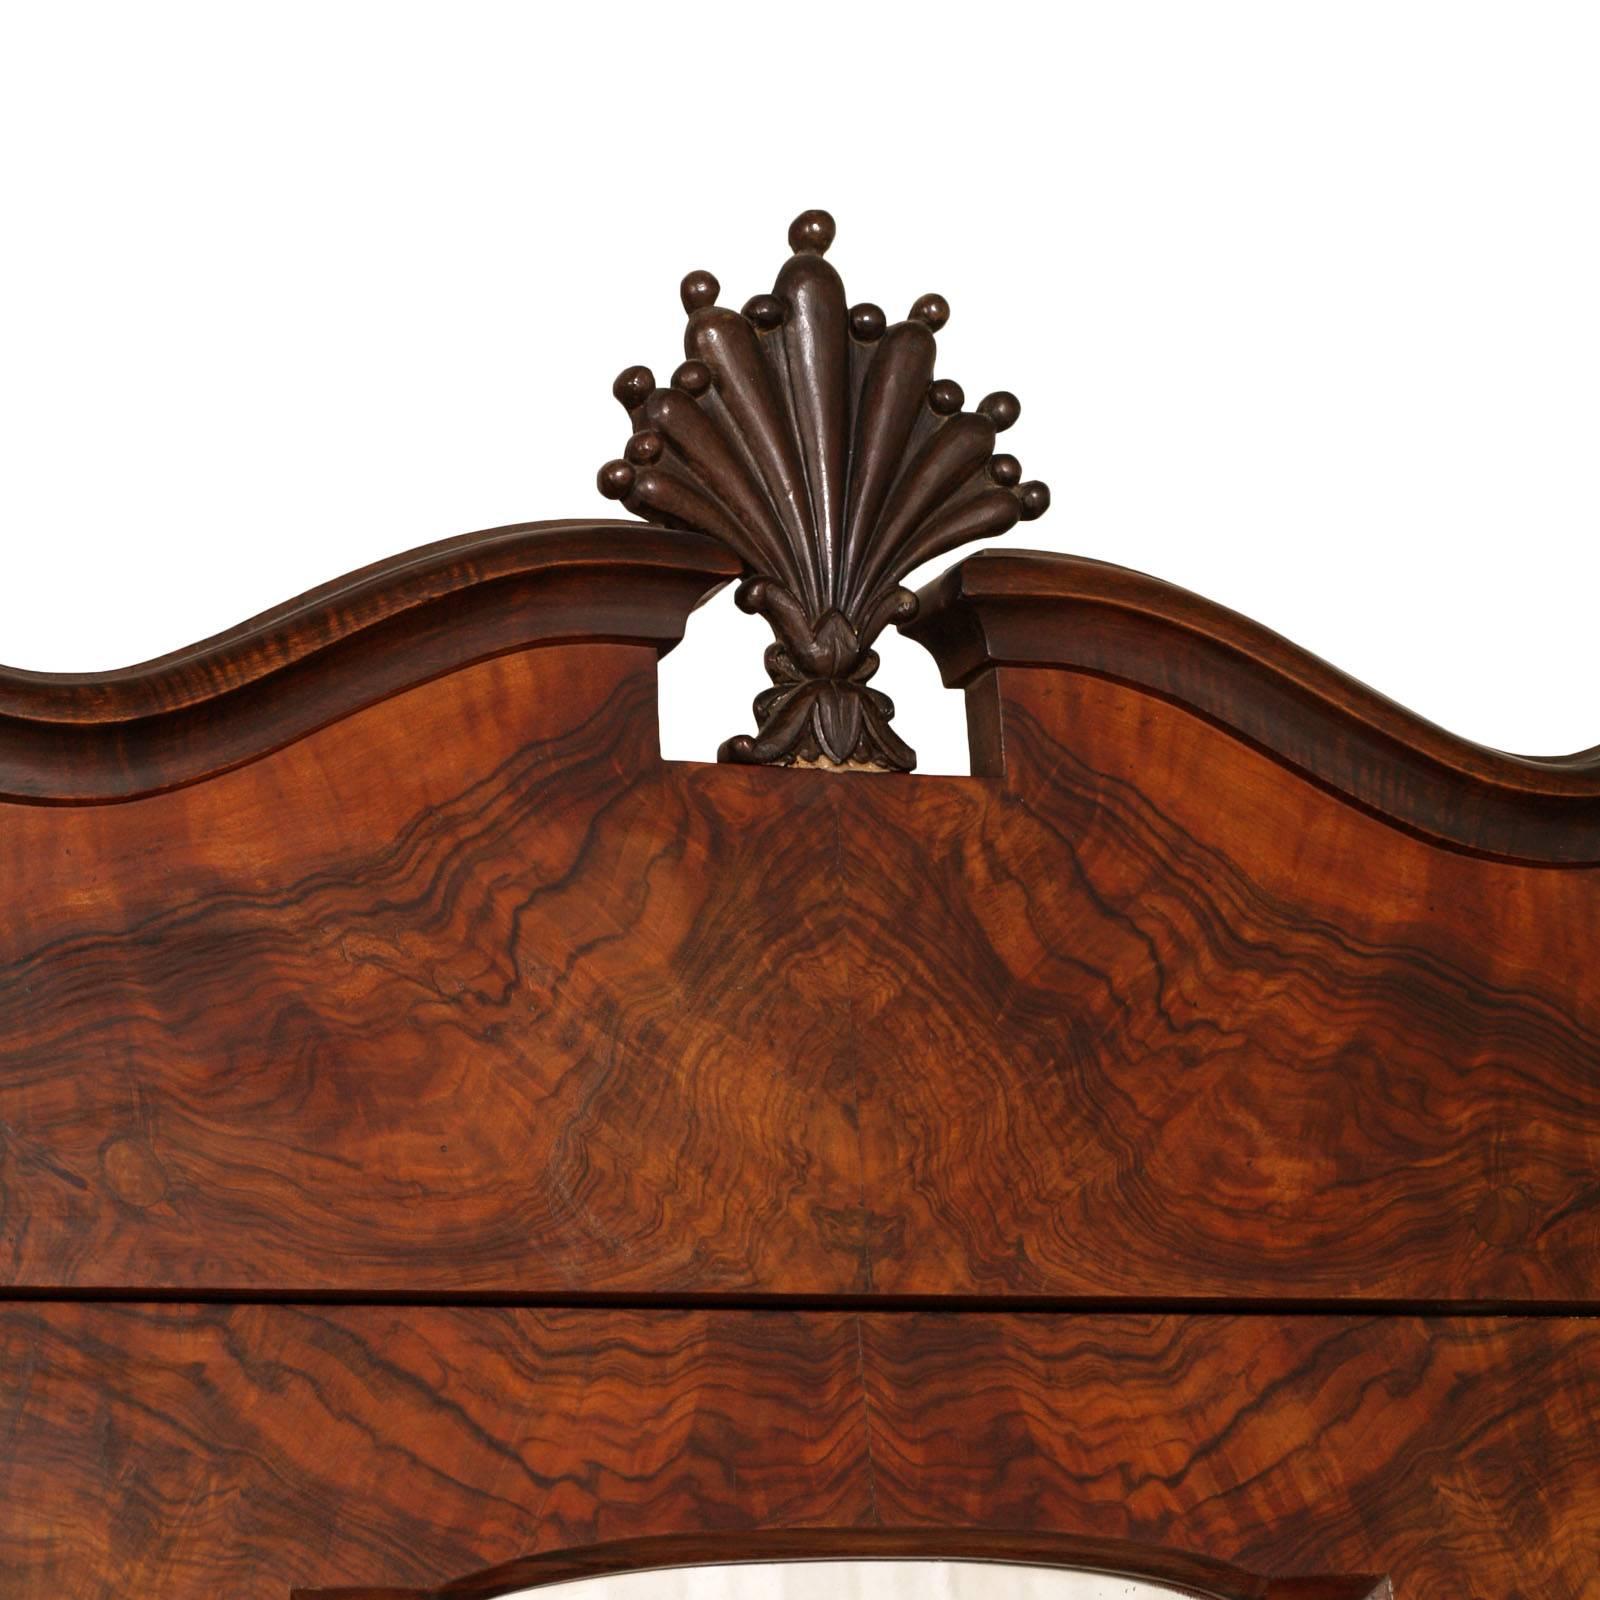 Baroque Revival Eclectic Baroque Chippendale Wardrobe in Burl and Ebonized Carved Walnut